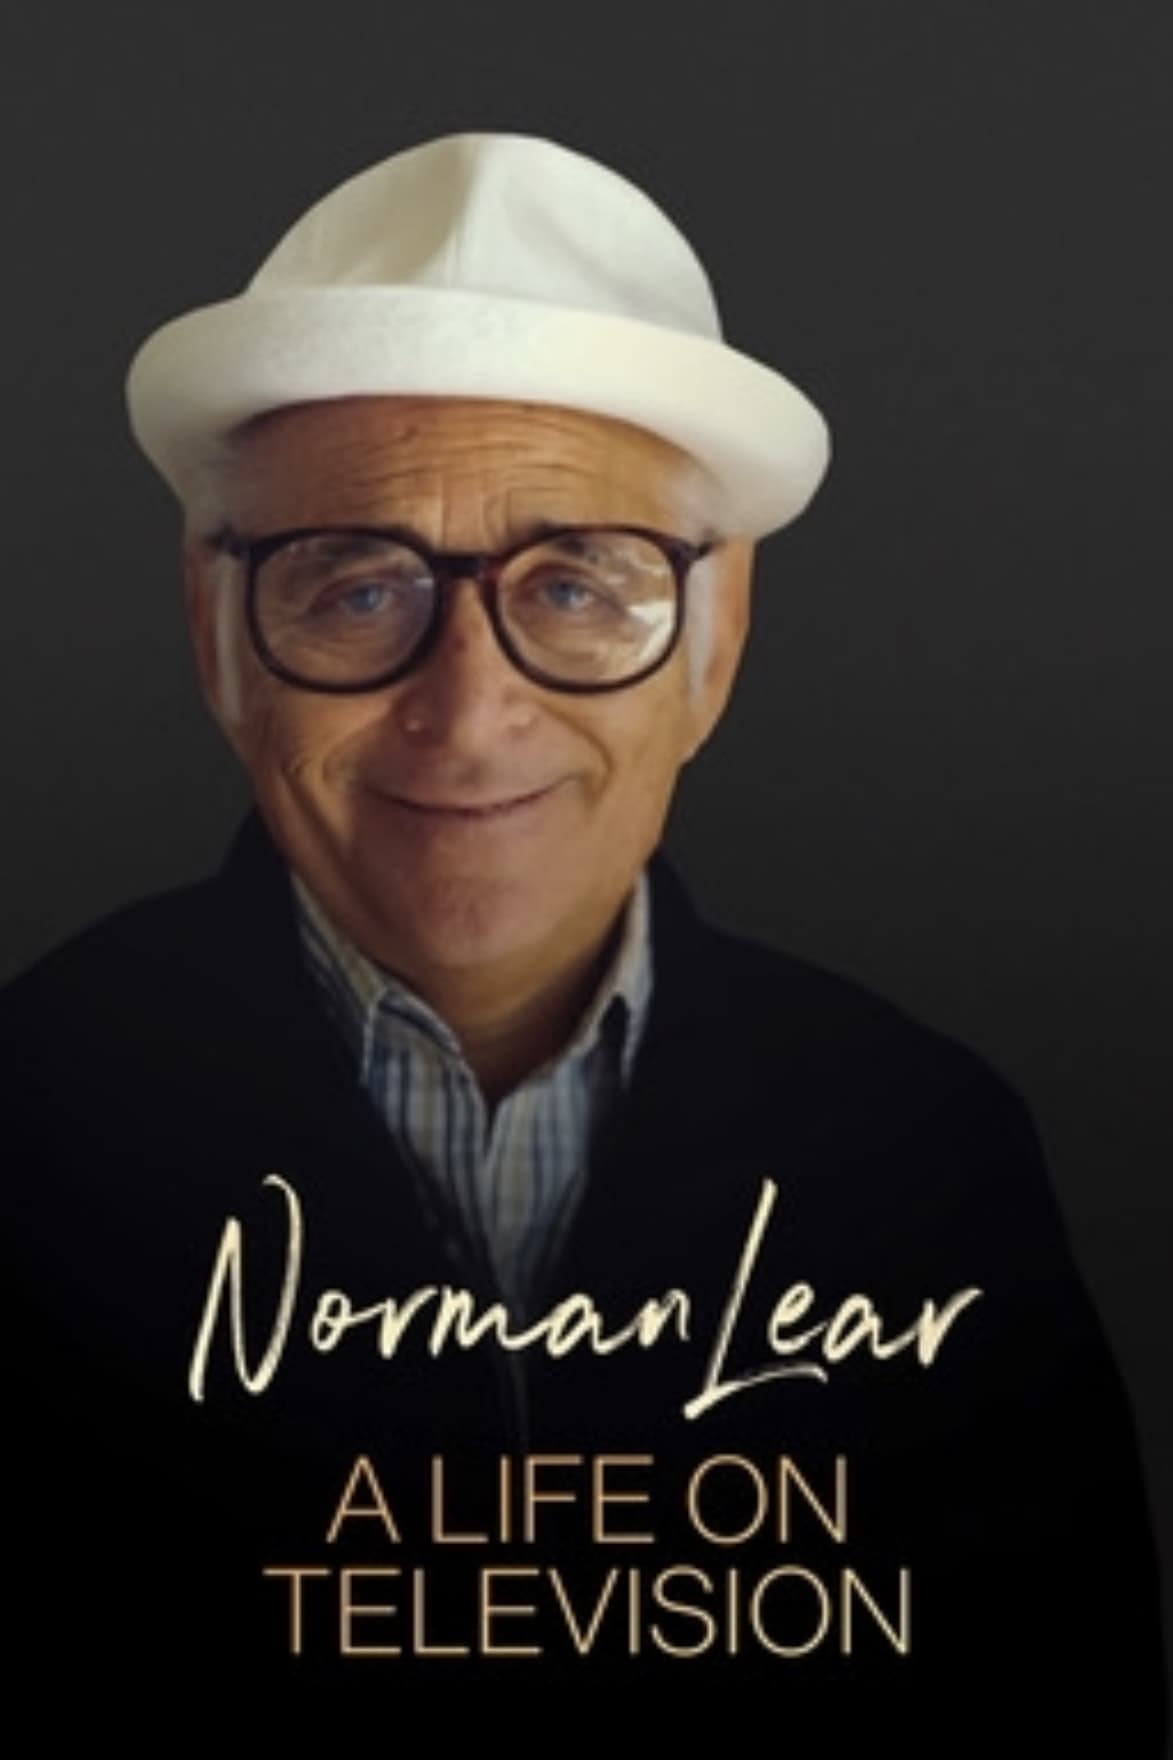 Norman Lear: A Life on Television